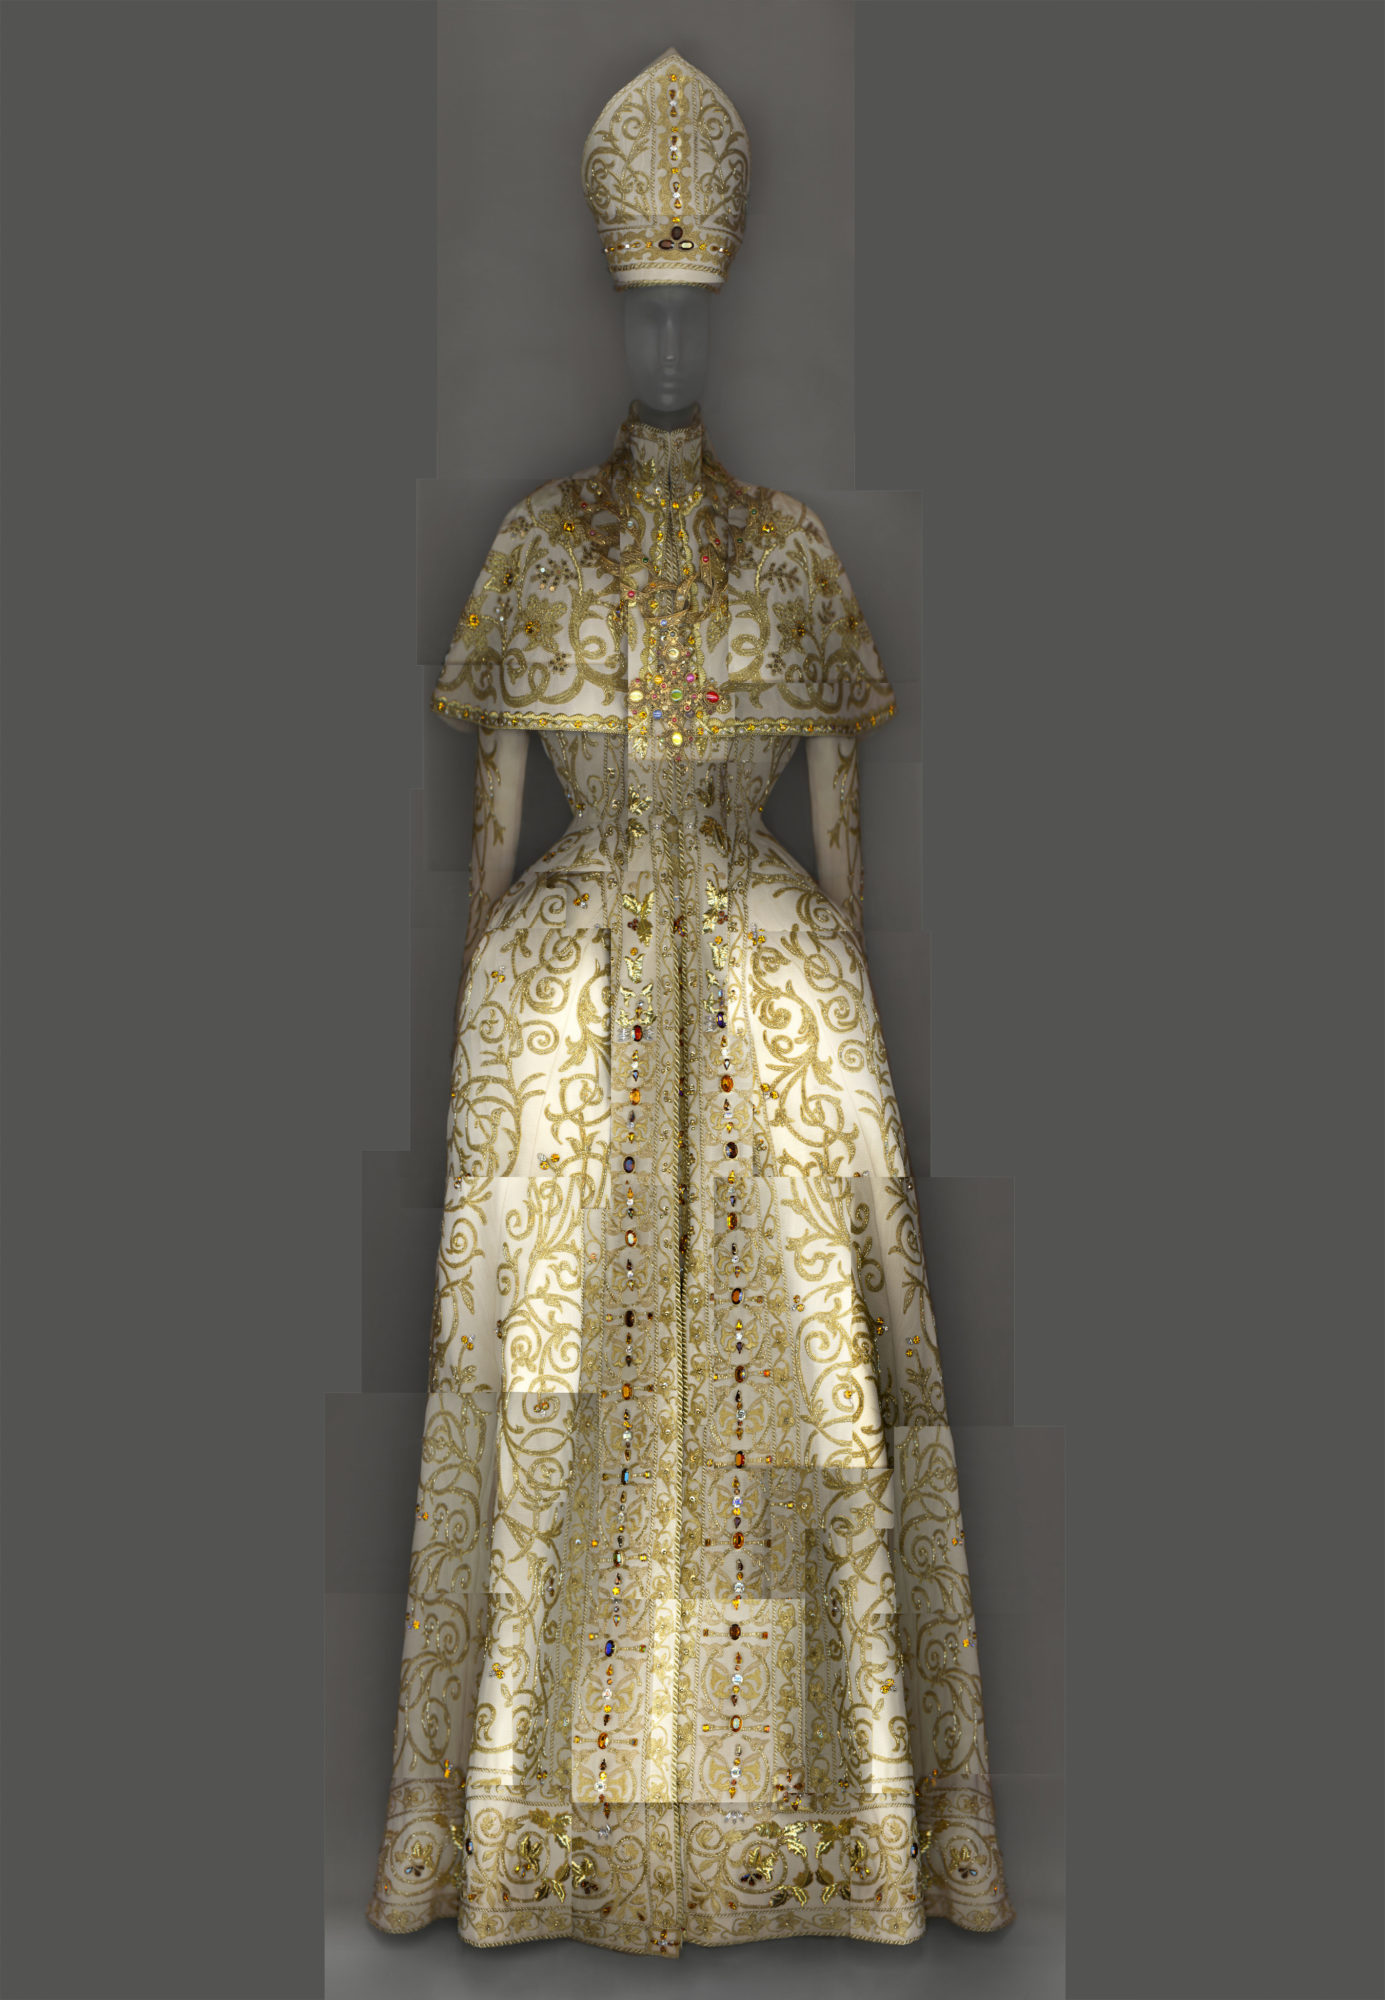 ivory gown with a gold pattern, cinched at the waist, and a hat shaped like a pope's traditional headwear.